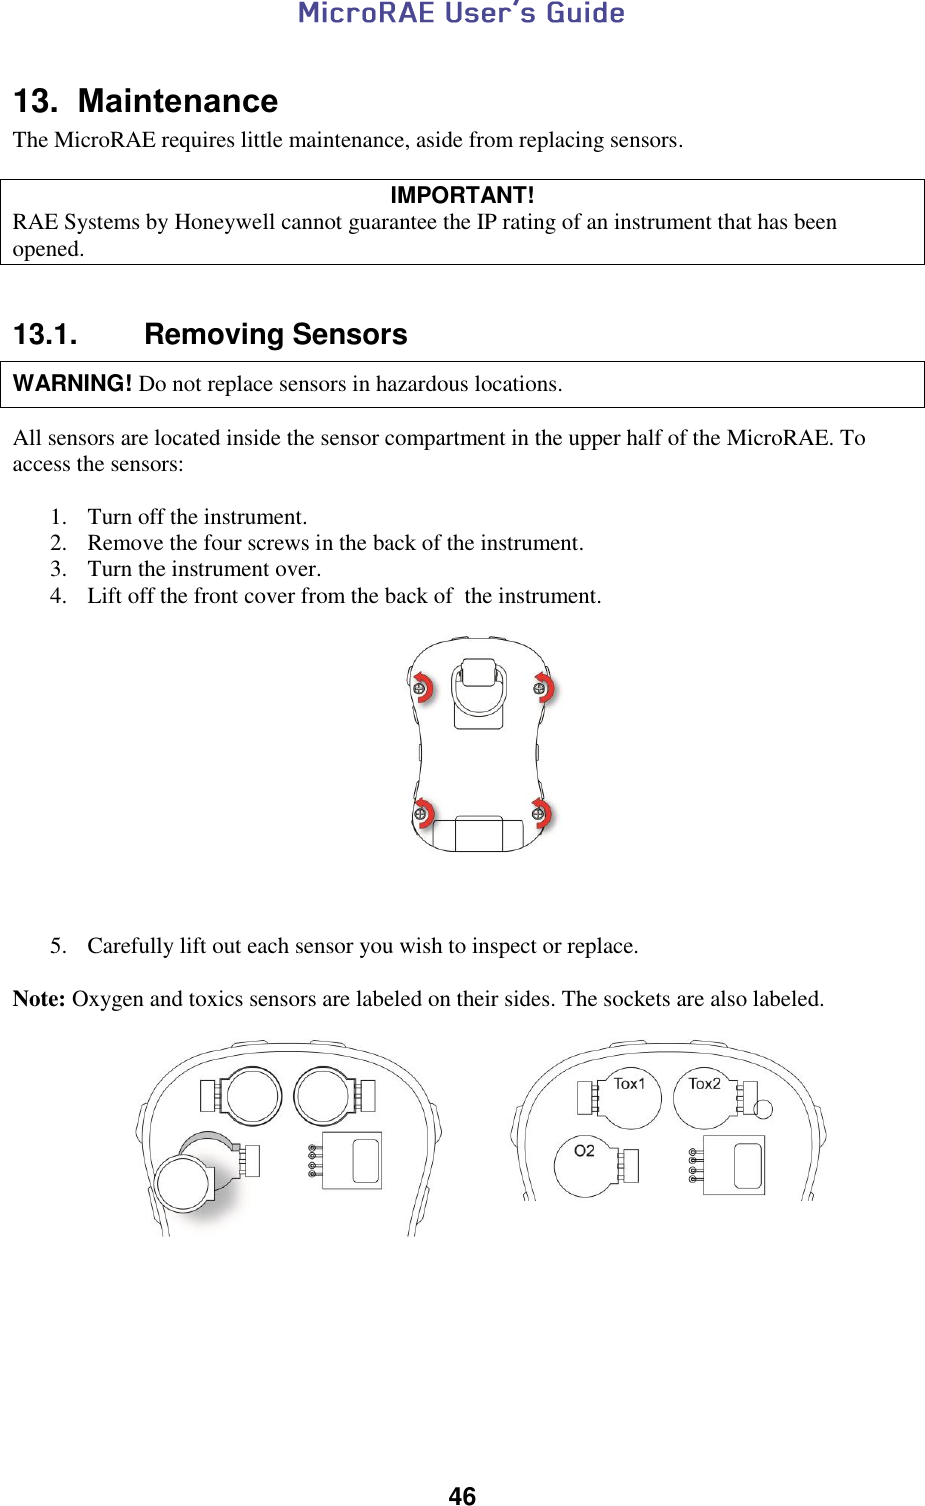  46  13.  Maintenance The MicroRAE requires little maintenance, aside from replacing sensors.  IMPORTANT! RAE Systems by Honeywell cannot guarantee the IP rating of an instrument that has been opened.   13.1.  Removing Sensors   WARNING! Do not replace sensors in hazardous locations.   All sensors are located inside the sensor compartment in the upper half of the MicroRAE. To access the sensors:  1. Turn off the instrument. 2. Remove the four screws in the back of the instrument. 3. Turn the instrument over. 4. Lift off the front cover from the back of  the instrument.                 5. Carefully lift out each sensor you wish to inspect or replace.   Note: Oxygen and toxics sensors are labeled on their sides. The sockets are also labeled.                                  